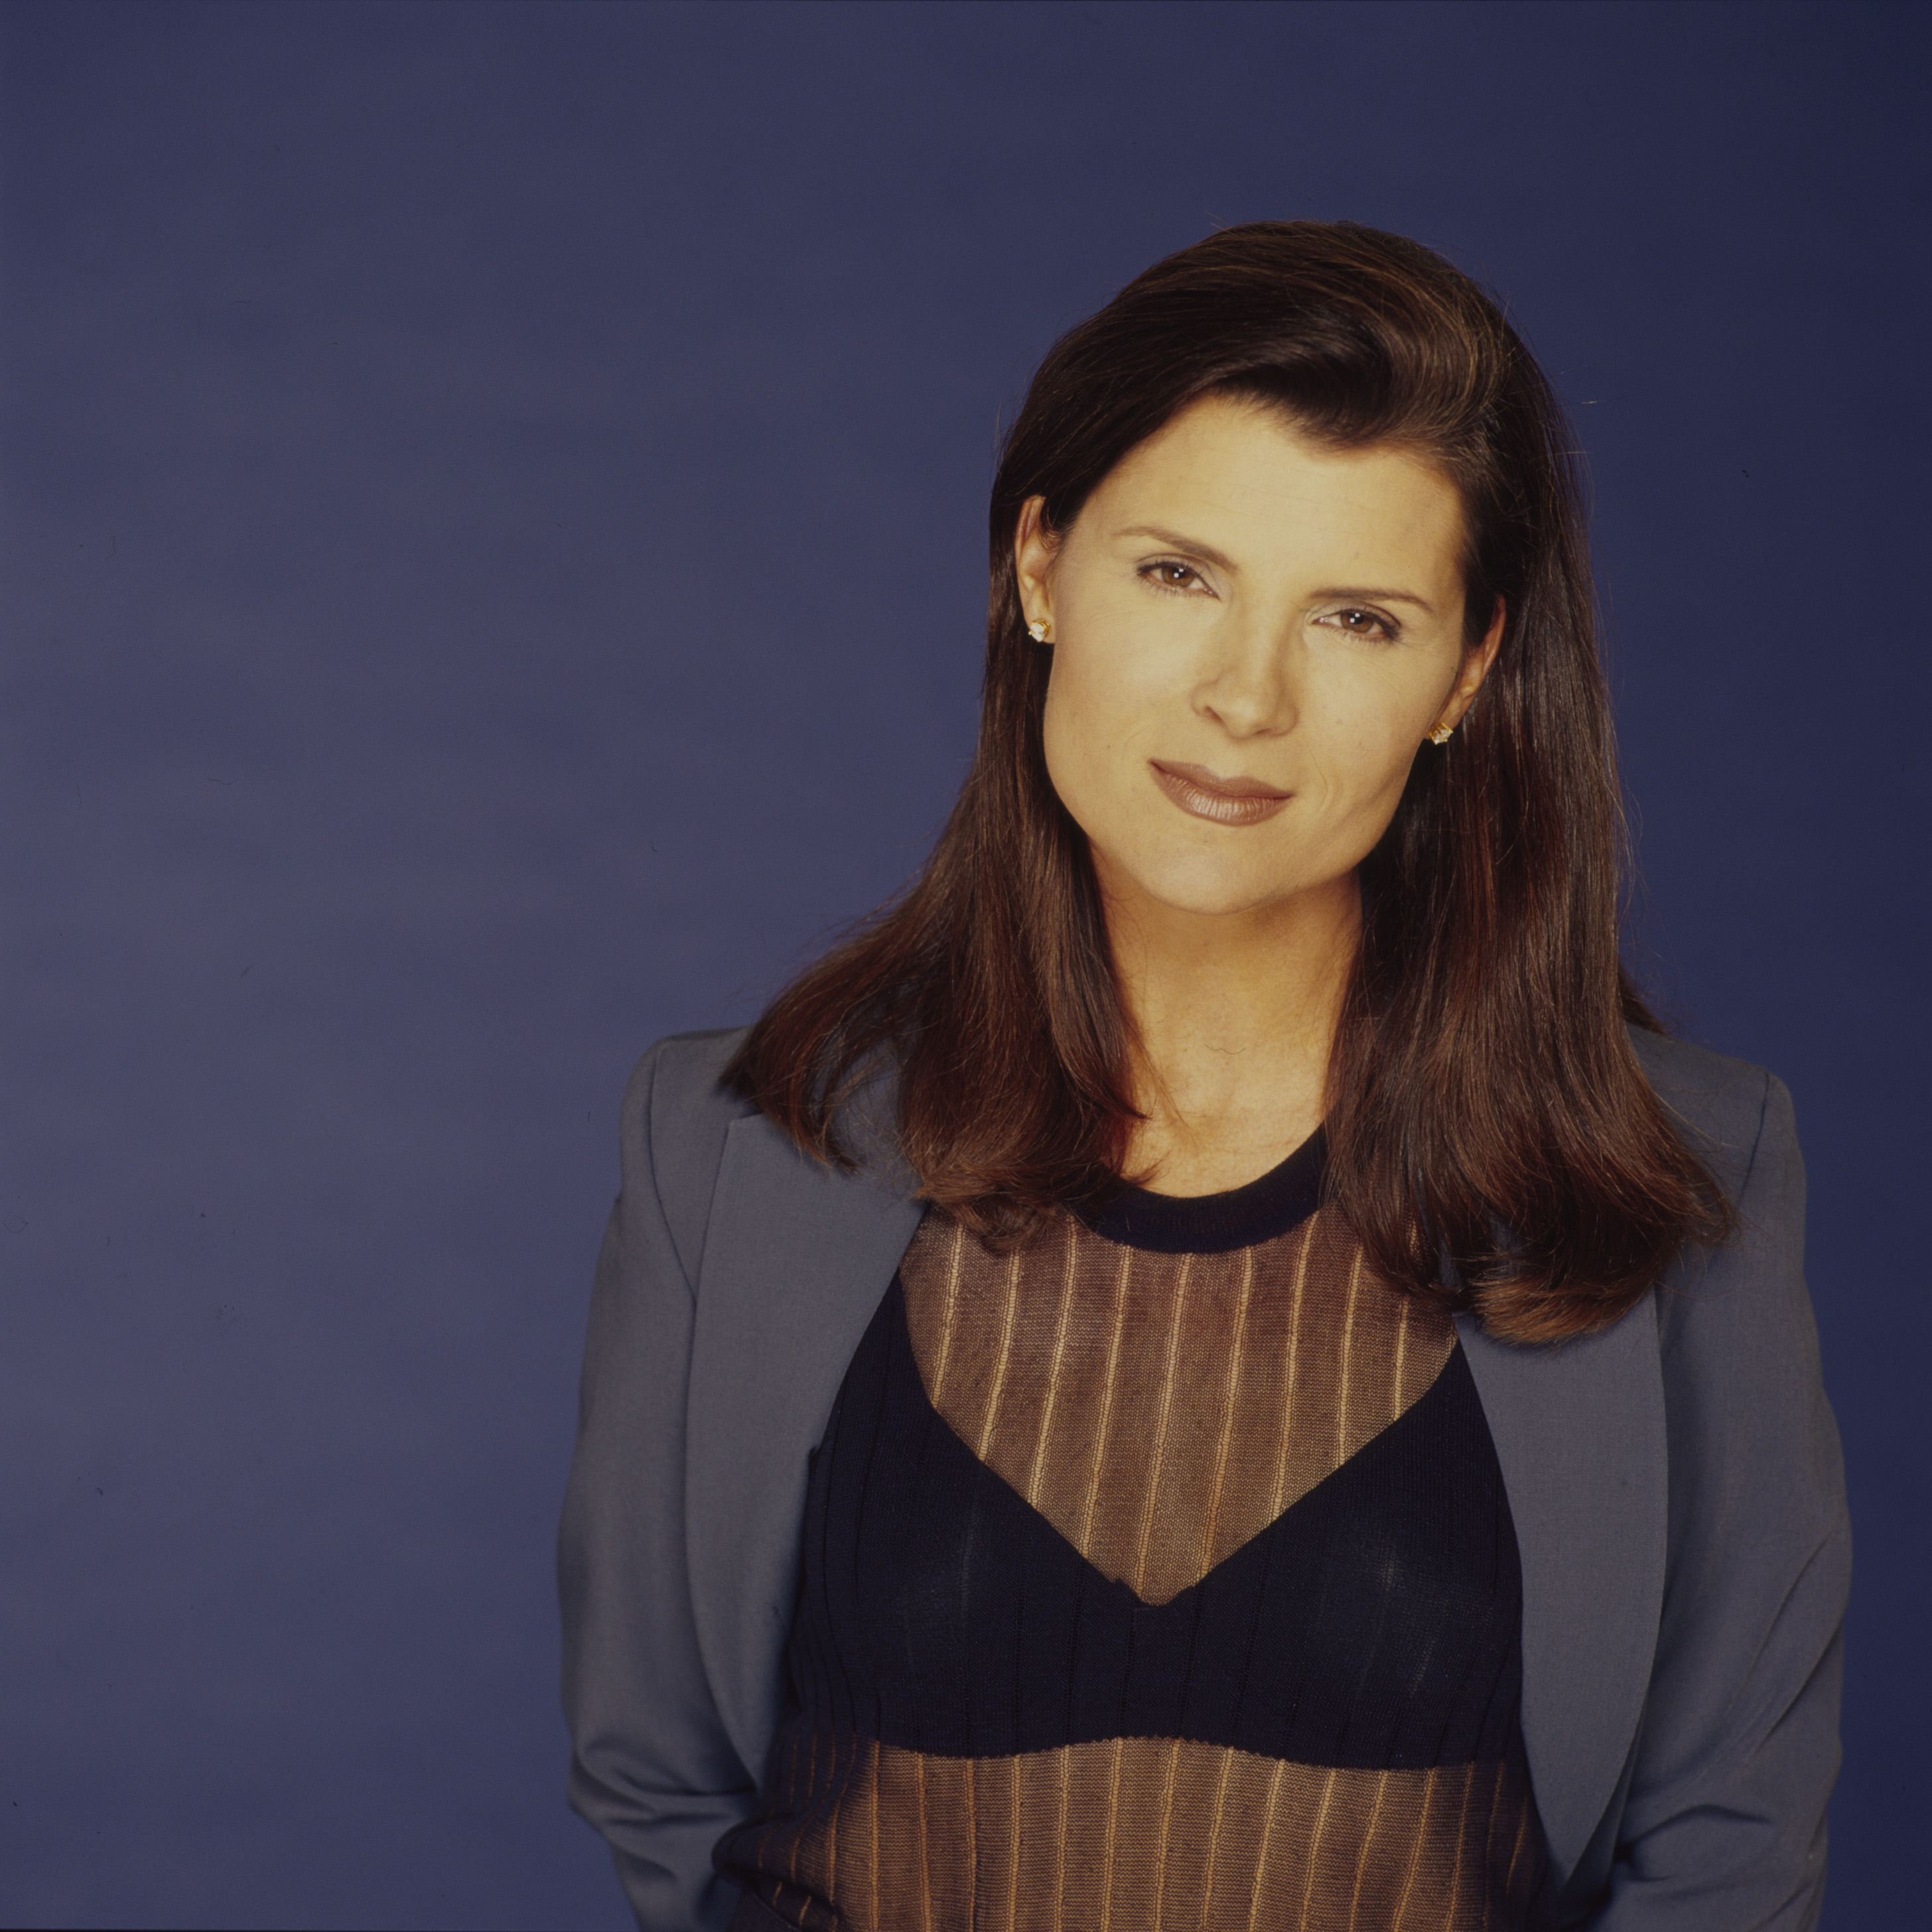 'The Bold and the Beautiful' star Kimberlin Brown in a blue suit, poses in front of a blue backdrop.